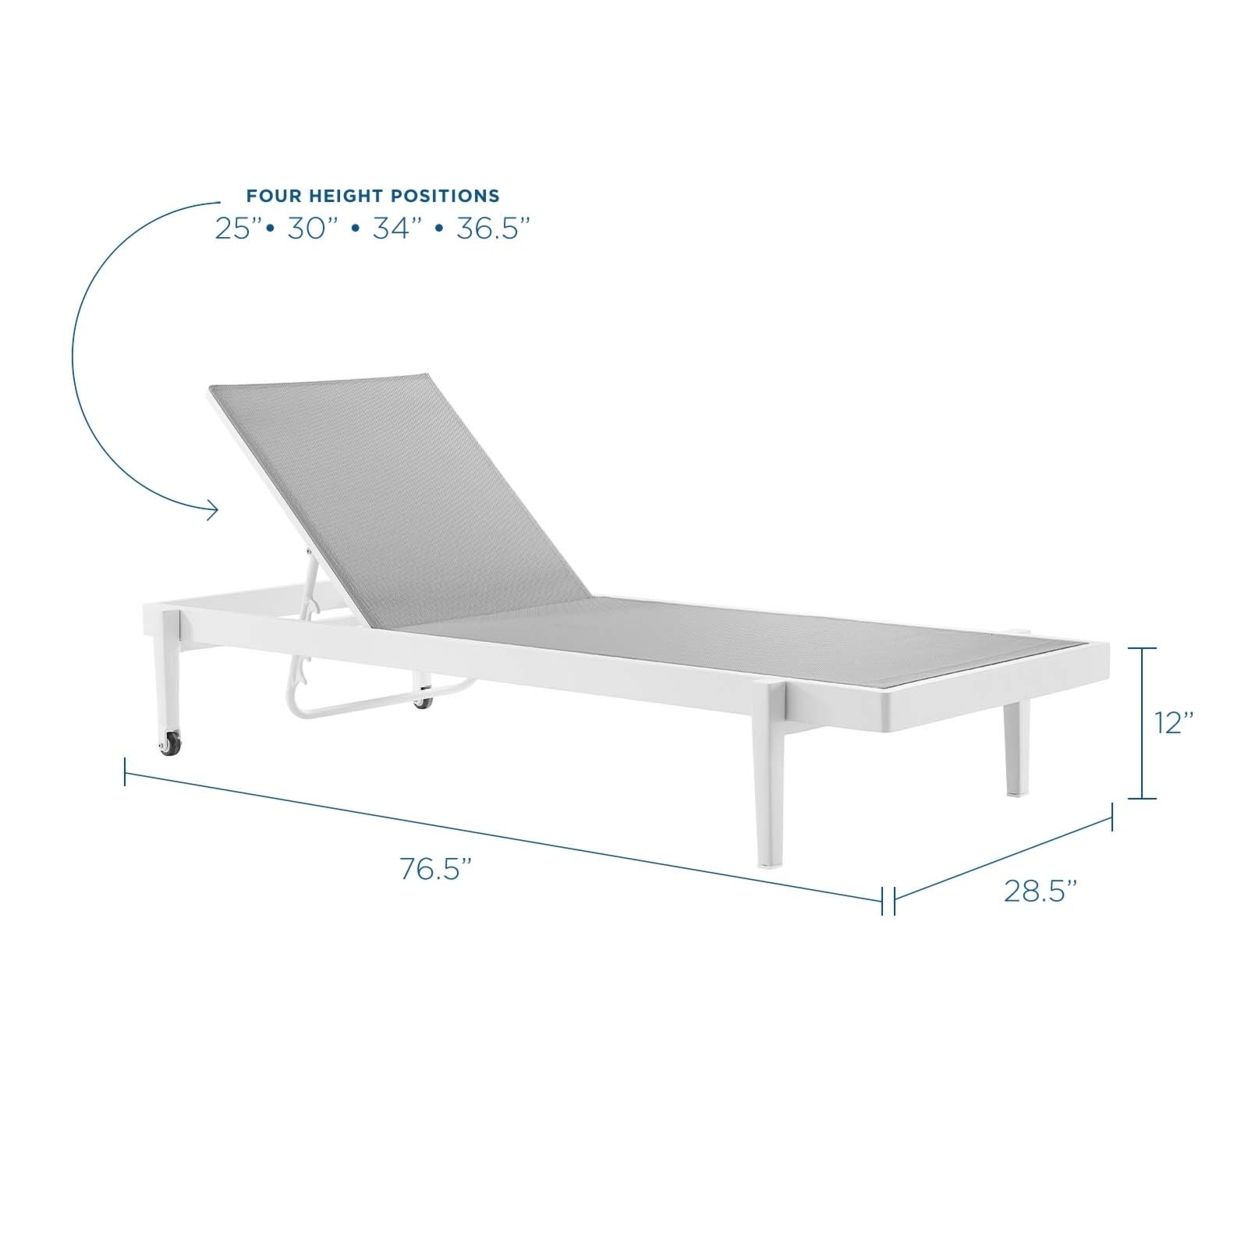 Modway Charleston Metal Aluminum Patio Chaise Lounge Chair in White/Gray - image 2 of 7